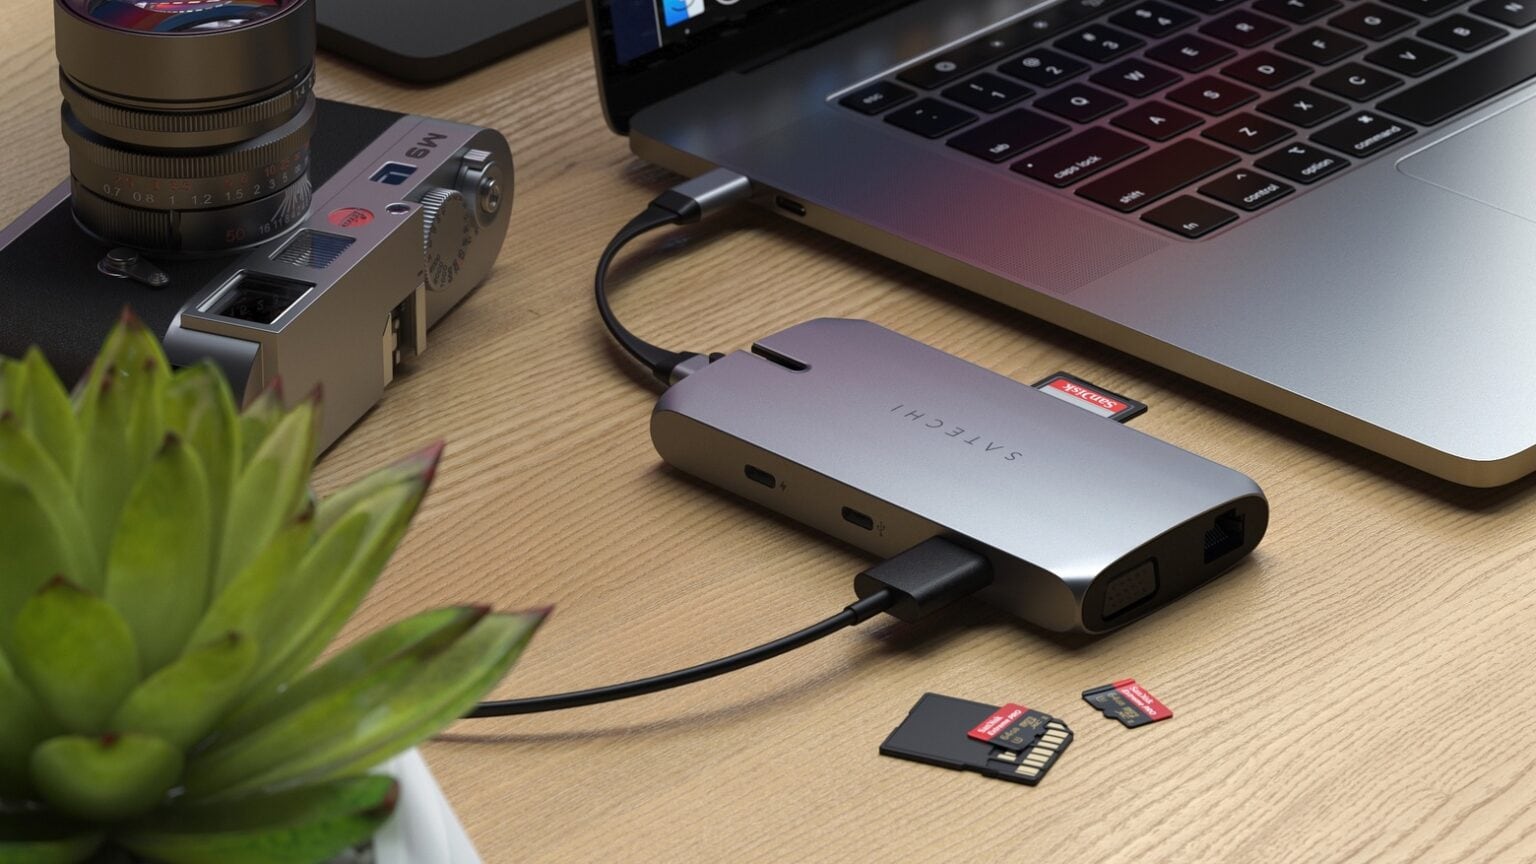 Satechi's portable USB-C hub is designed for home or travel.